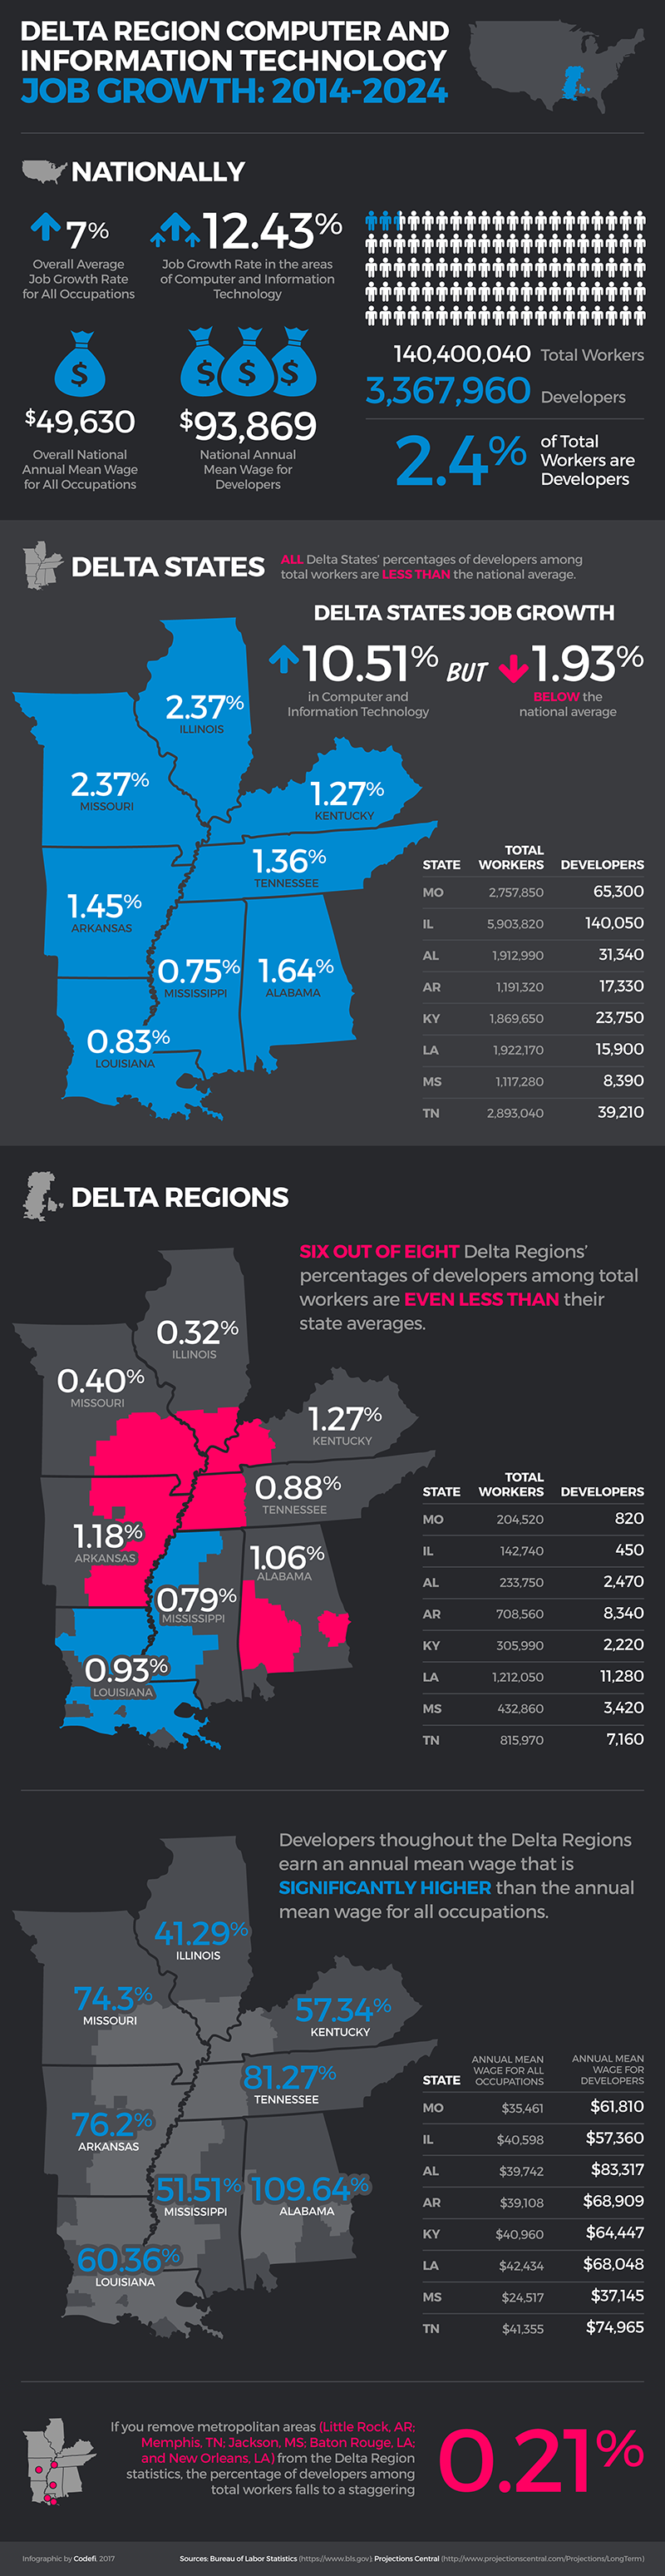 Delta Region Computer and IT Job Growth Infographic